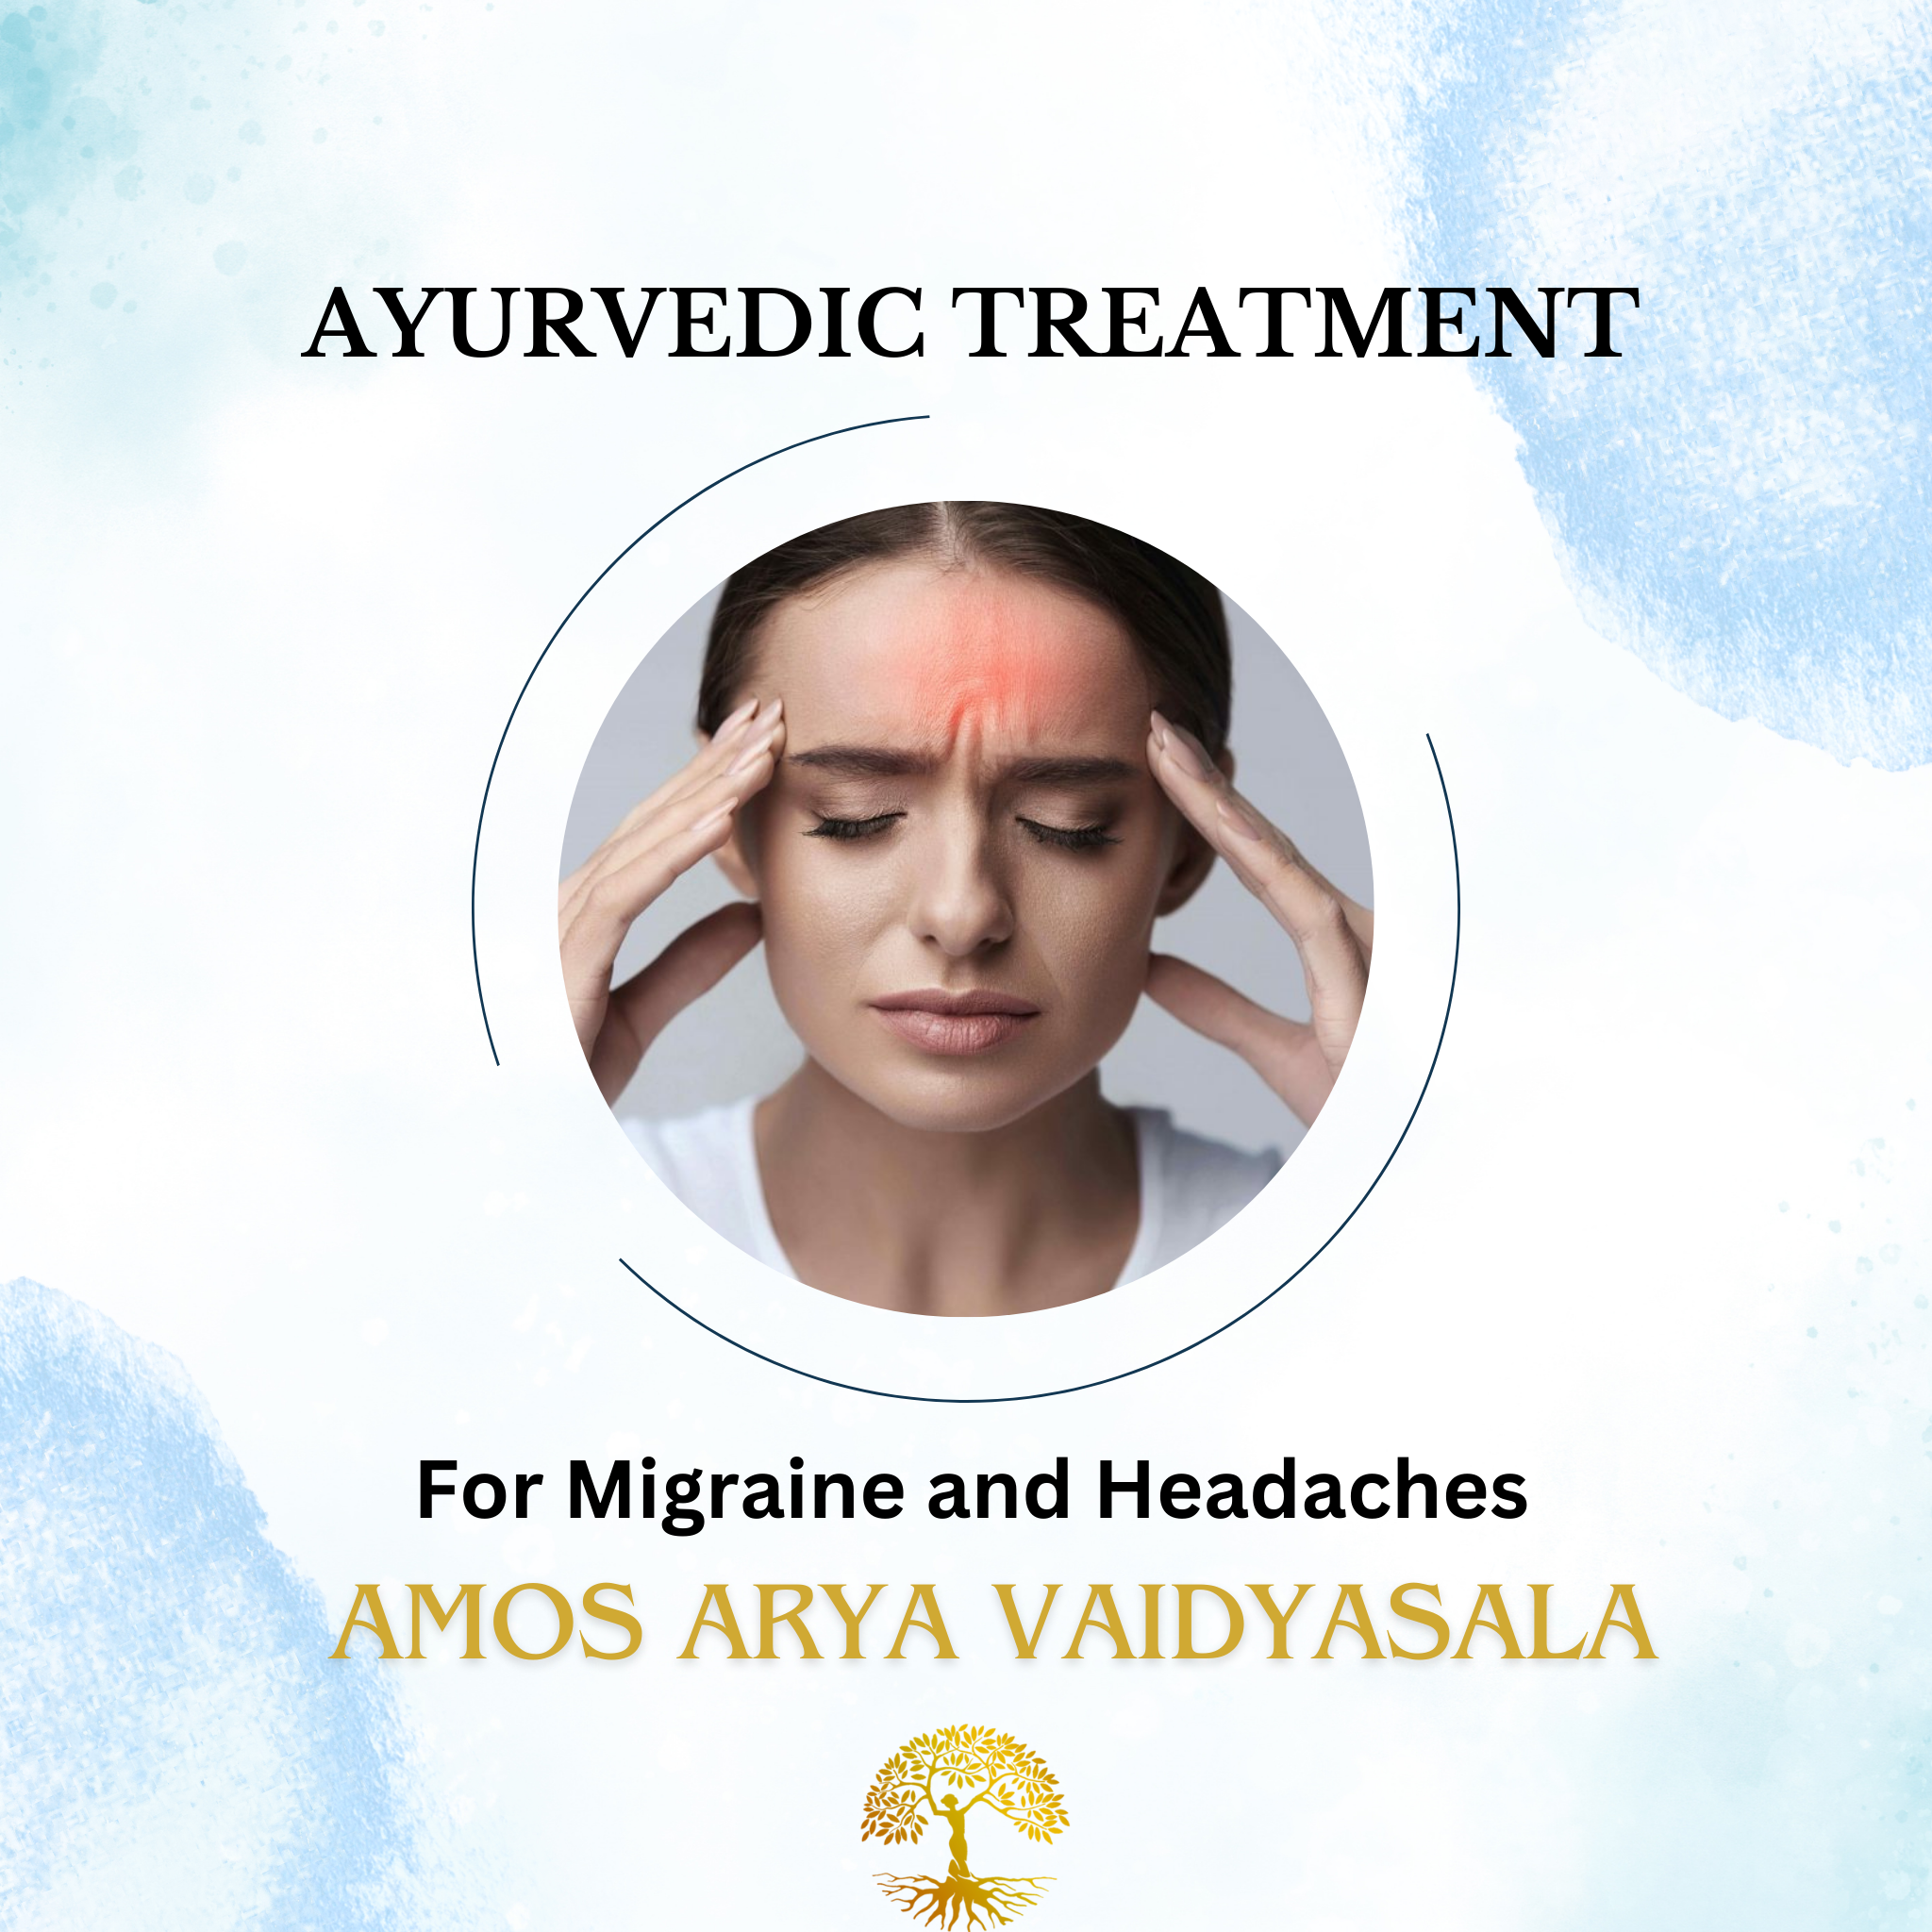 is there a treatment for migraine in Ayurveda